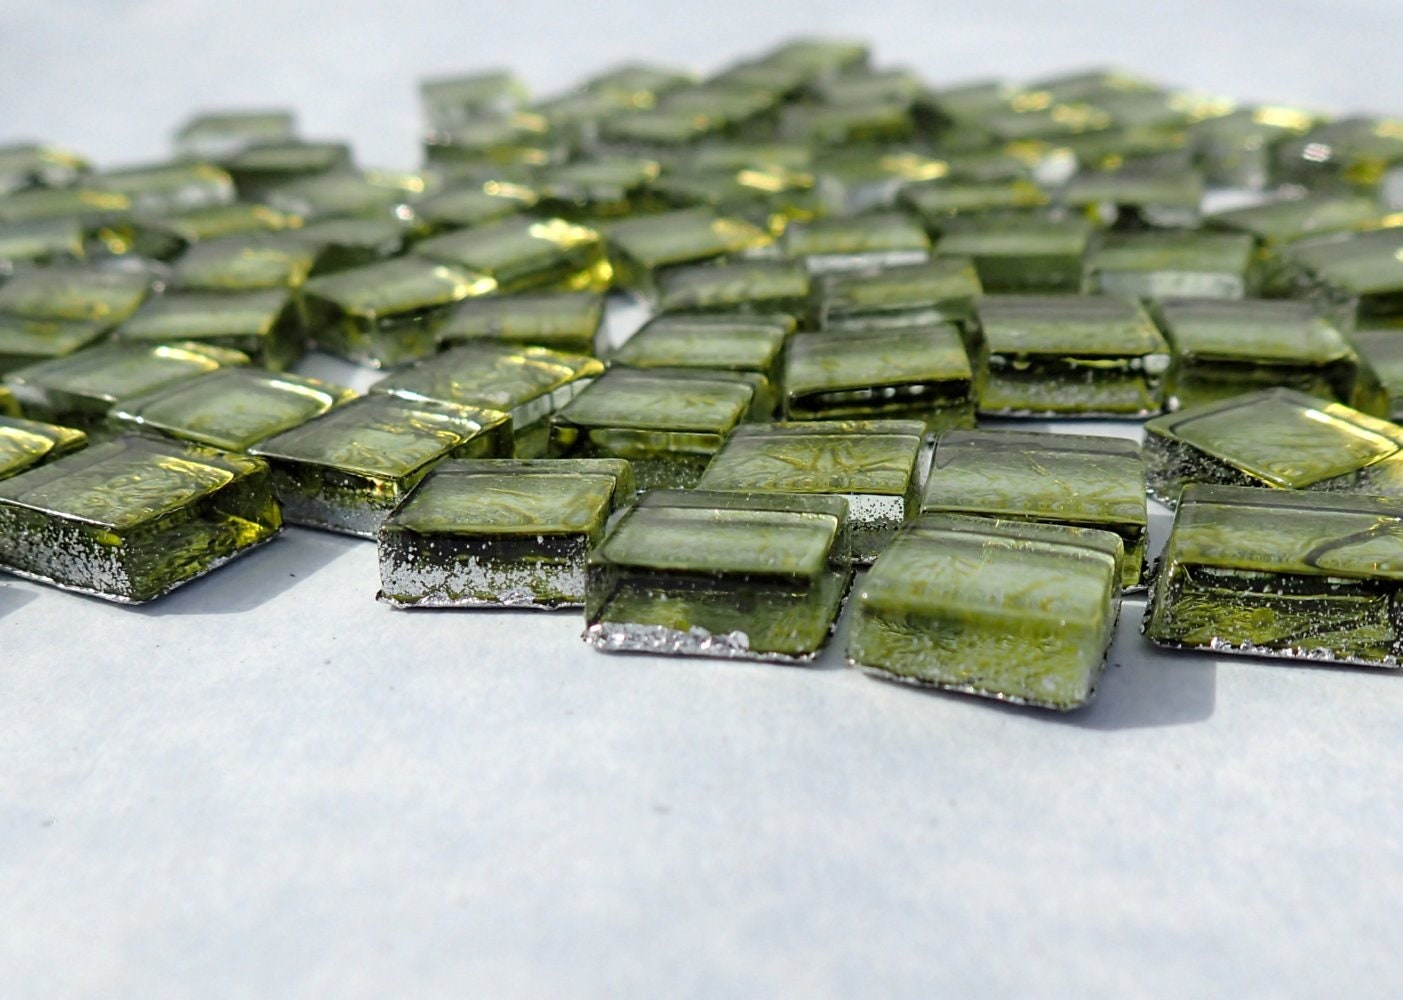 Green Foil Square Crystal Tiles - 10mm - 50g Metallic Glass Tiles in Chartreuse - Approx 50 Tiles